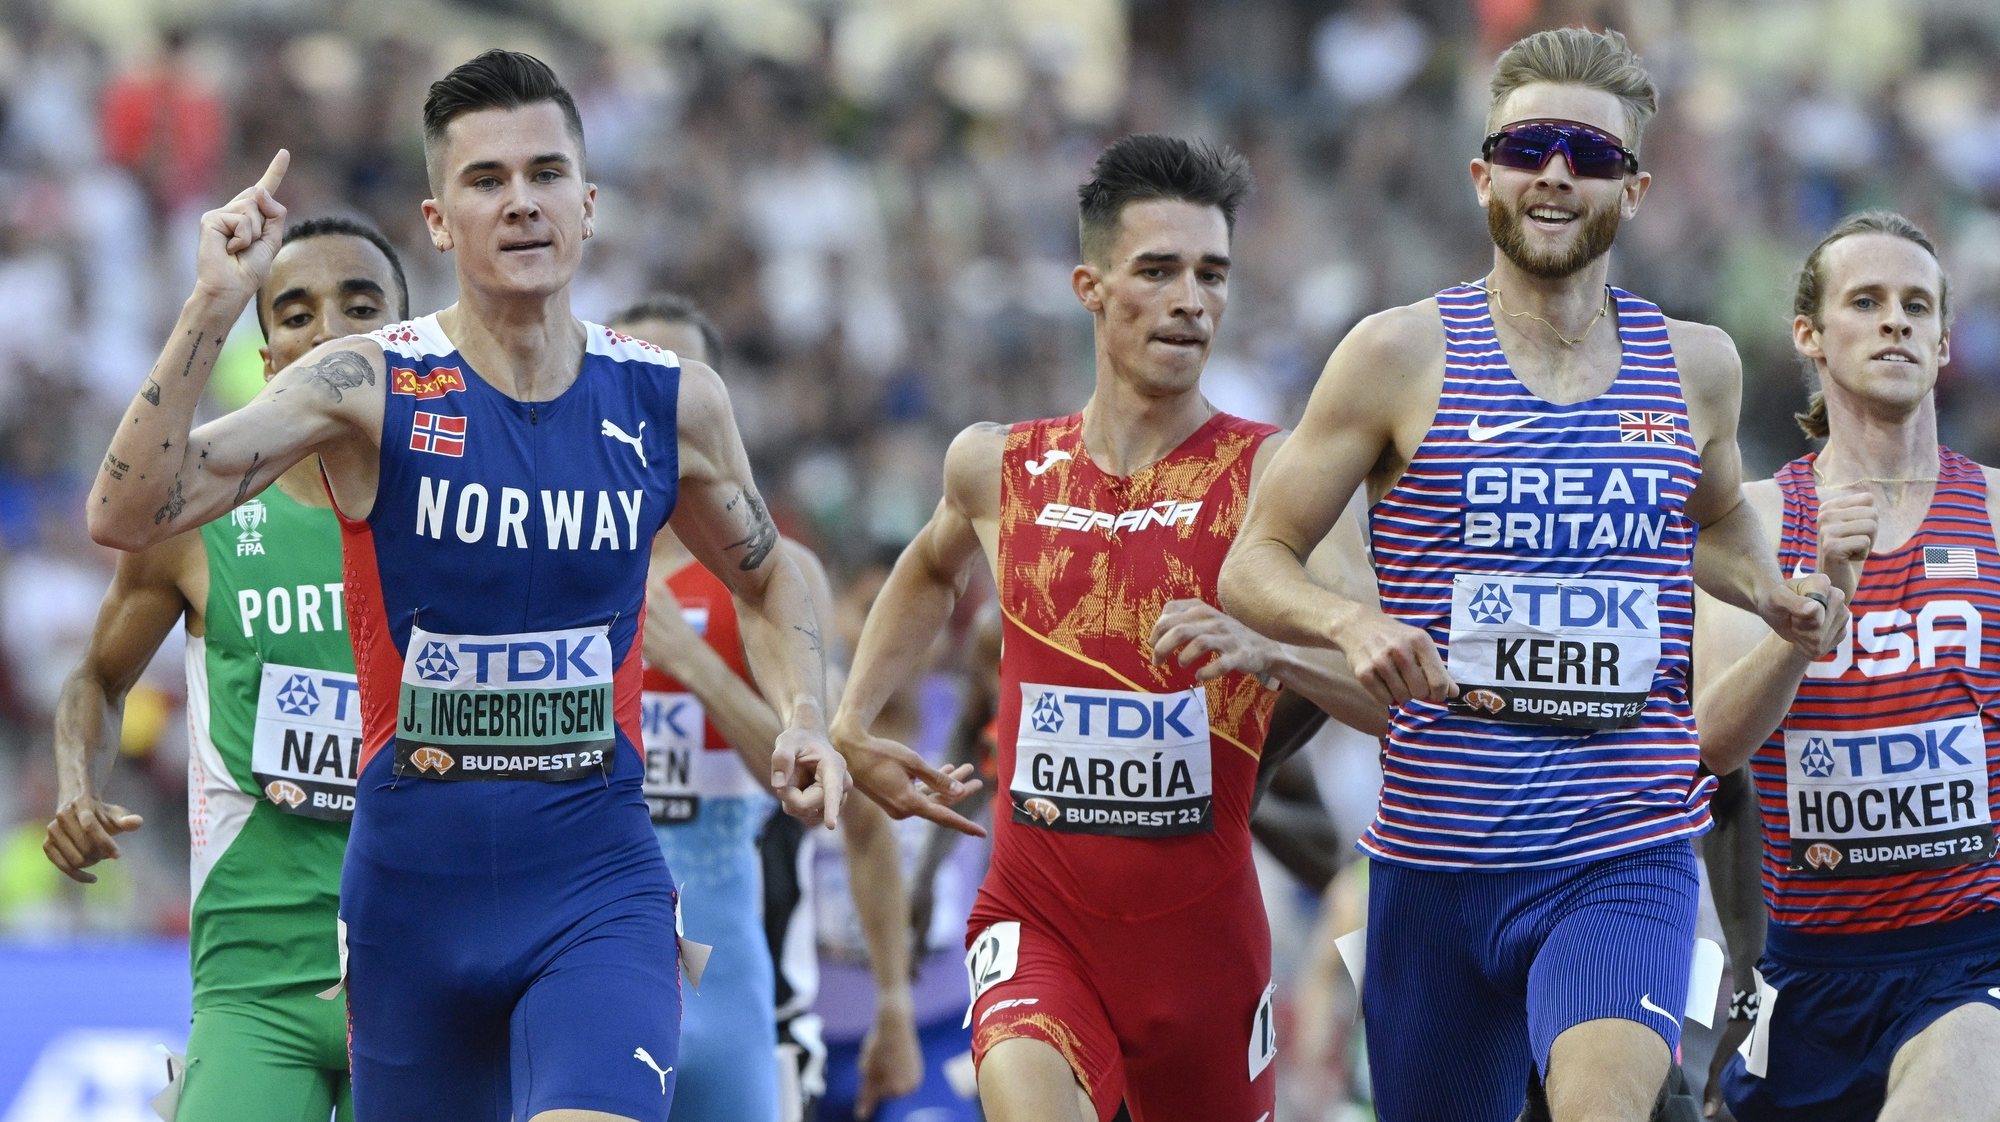 epa10810409 (L-R) Jakob Ingebrigsten of Norway, Mario Garcia of Spain, Josh Kerr of Britain and Cole Hocker of the USA compete in a semifinal of men&#039;s 1,500m run of the World Athletic Championships in the National Athletics Centre in Budapest, Hungary, 20 August 2023.  EPA/Szilard Koszticsak HUNGARY OUT